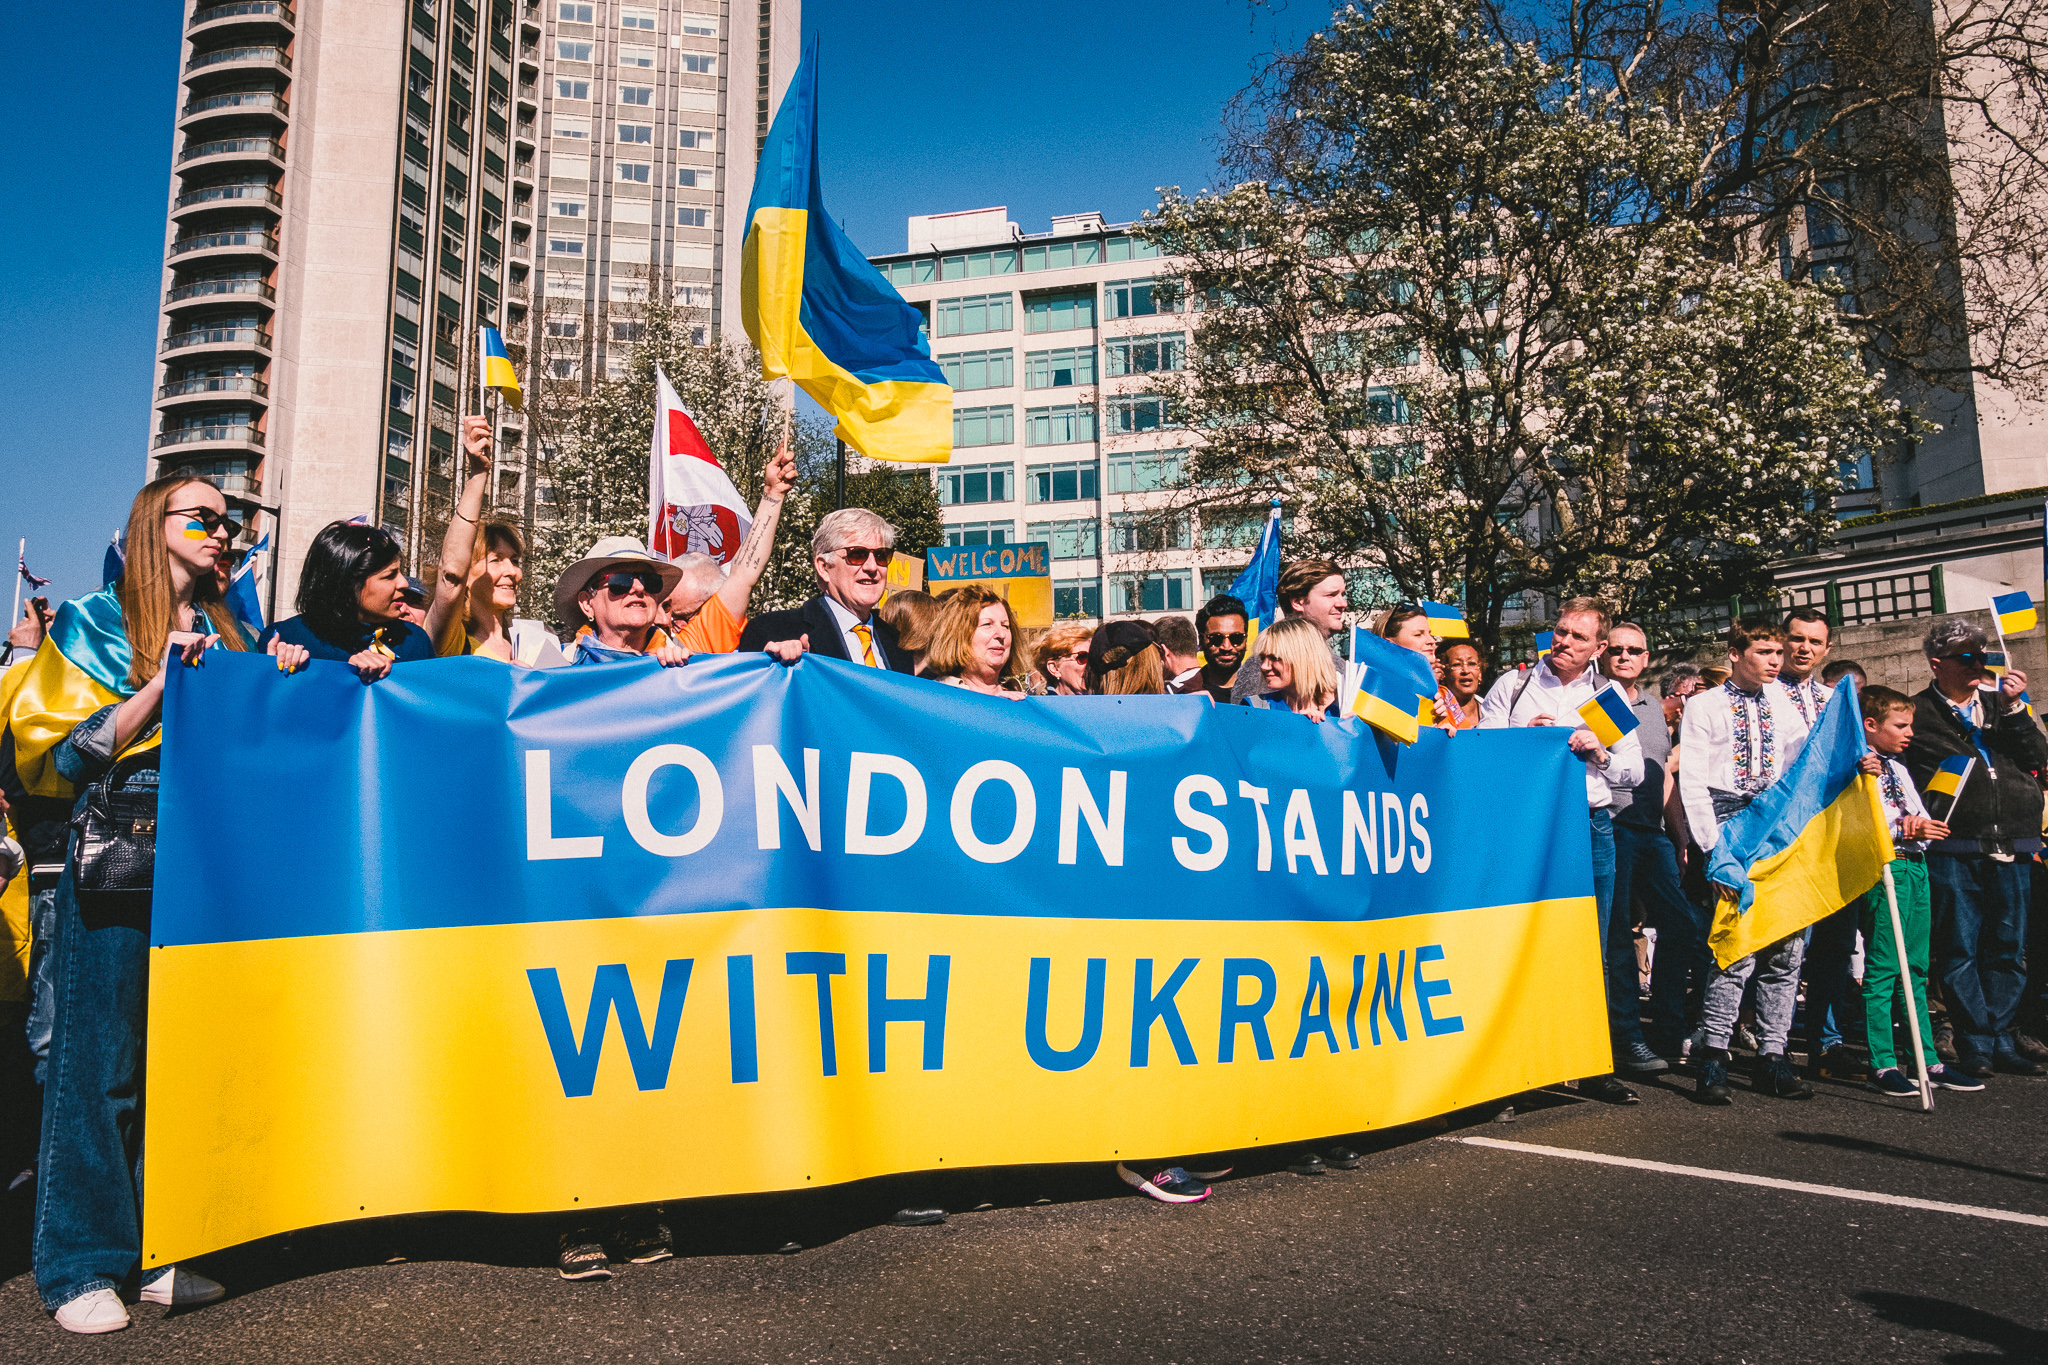 A group of protesters at the start of the march in solidarity with Ukraine holding a large banner that says: “London Stands with Ukraine”